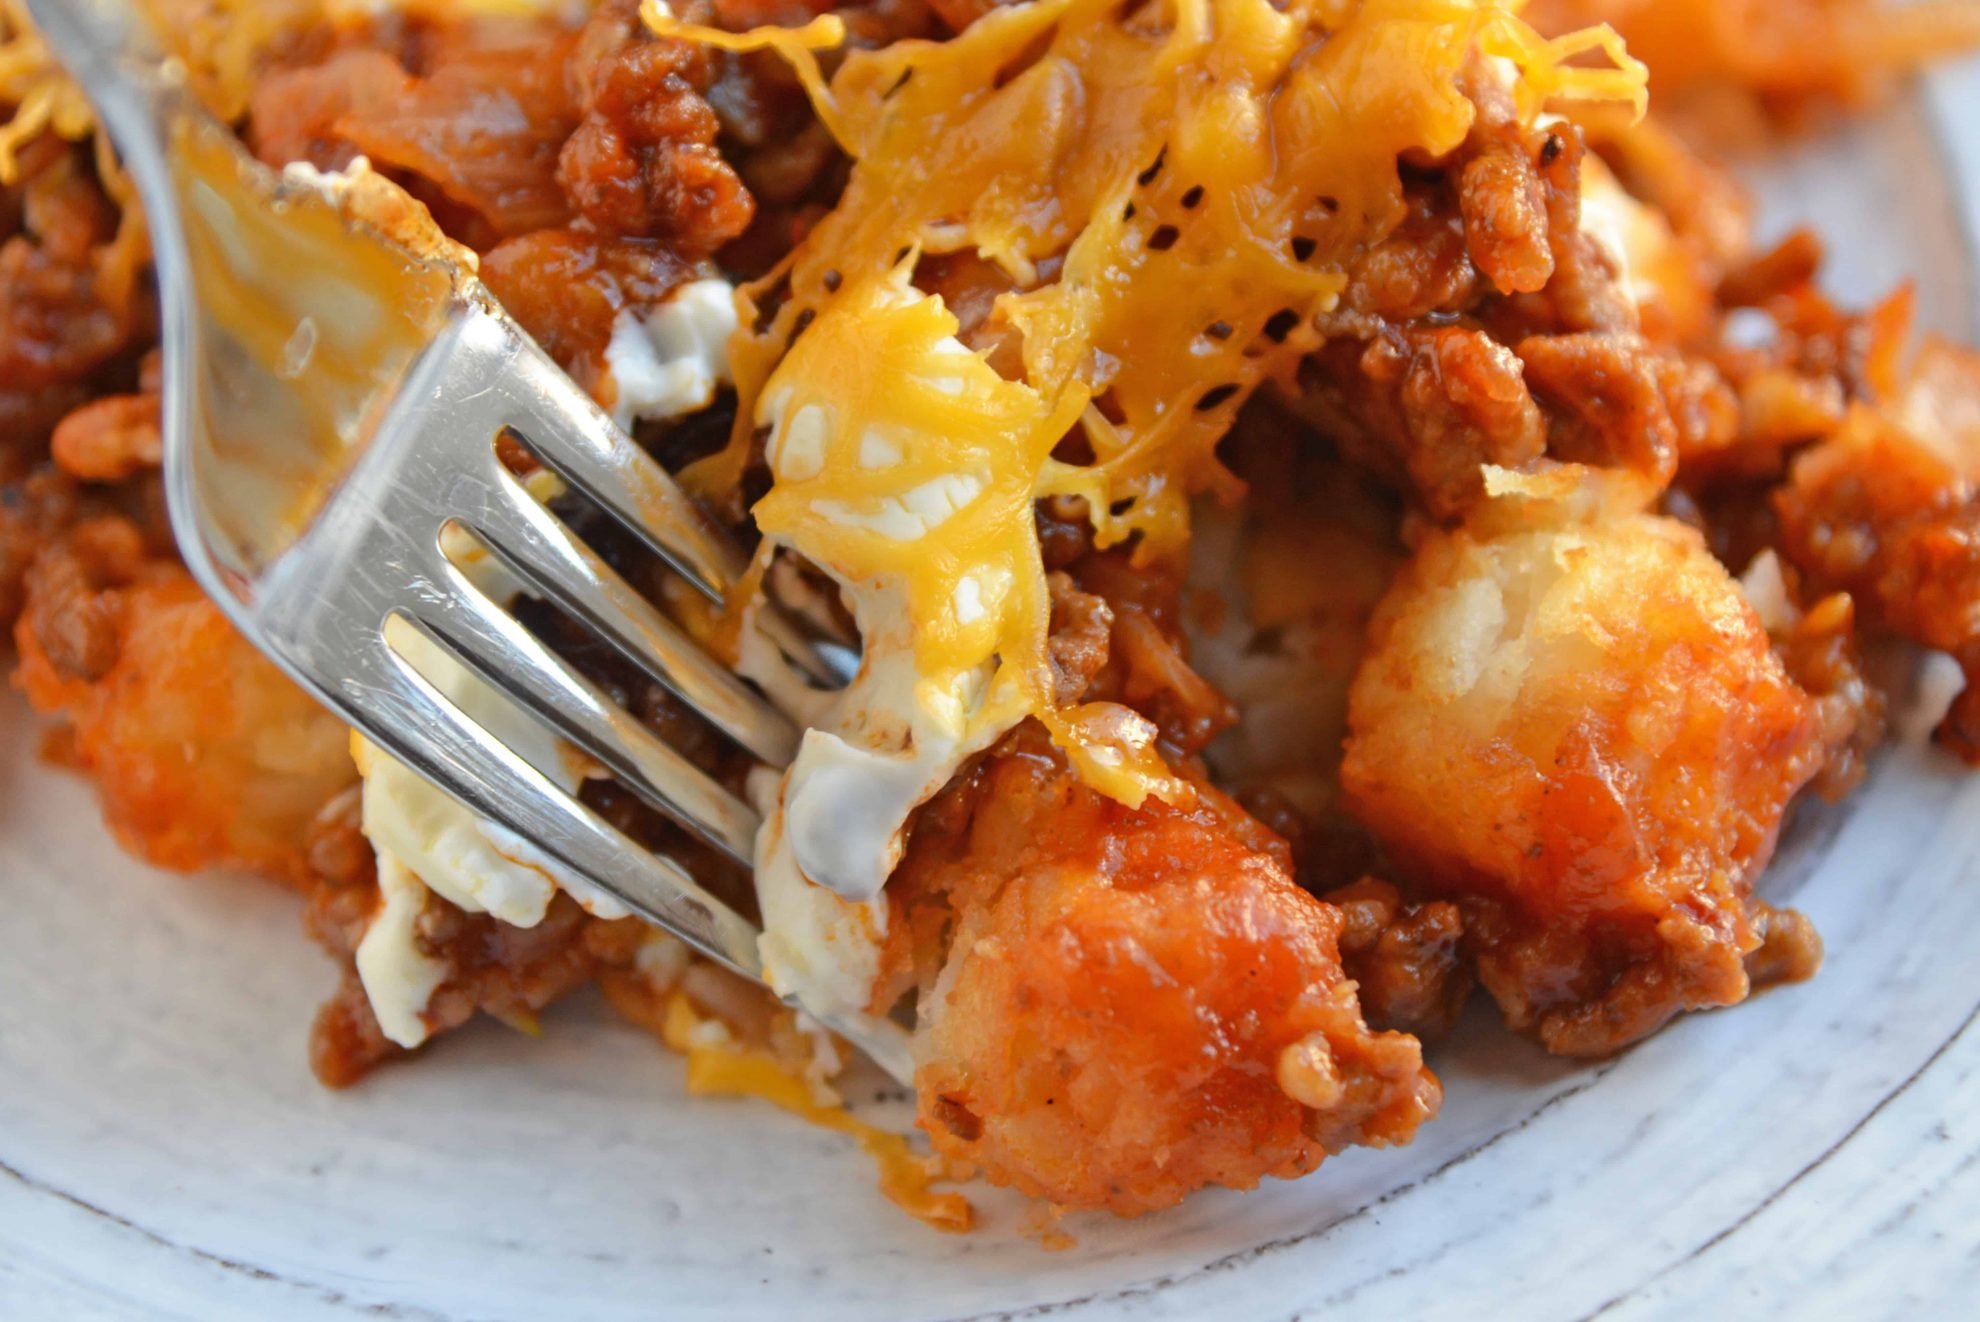 Sloppy Joe Tater Tot Casserole combines layers of crispy tater tots with homemade sloppy Joe mix, cream cheese and cheddar for the ultimate quick meal or party food! #tatertotcasserole #sloppyjoes www.savoryexperiments.com